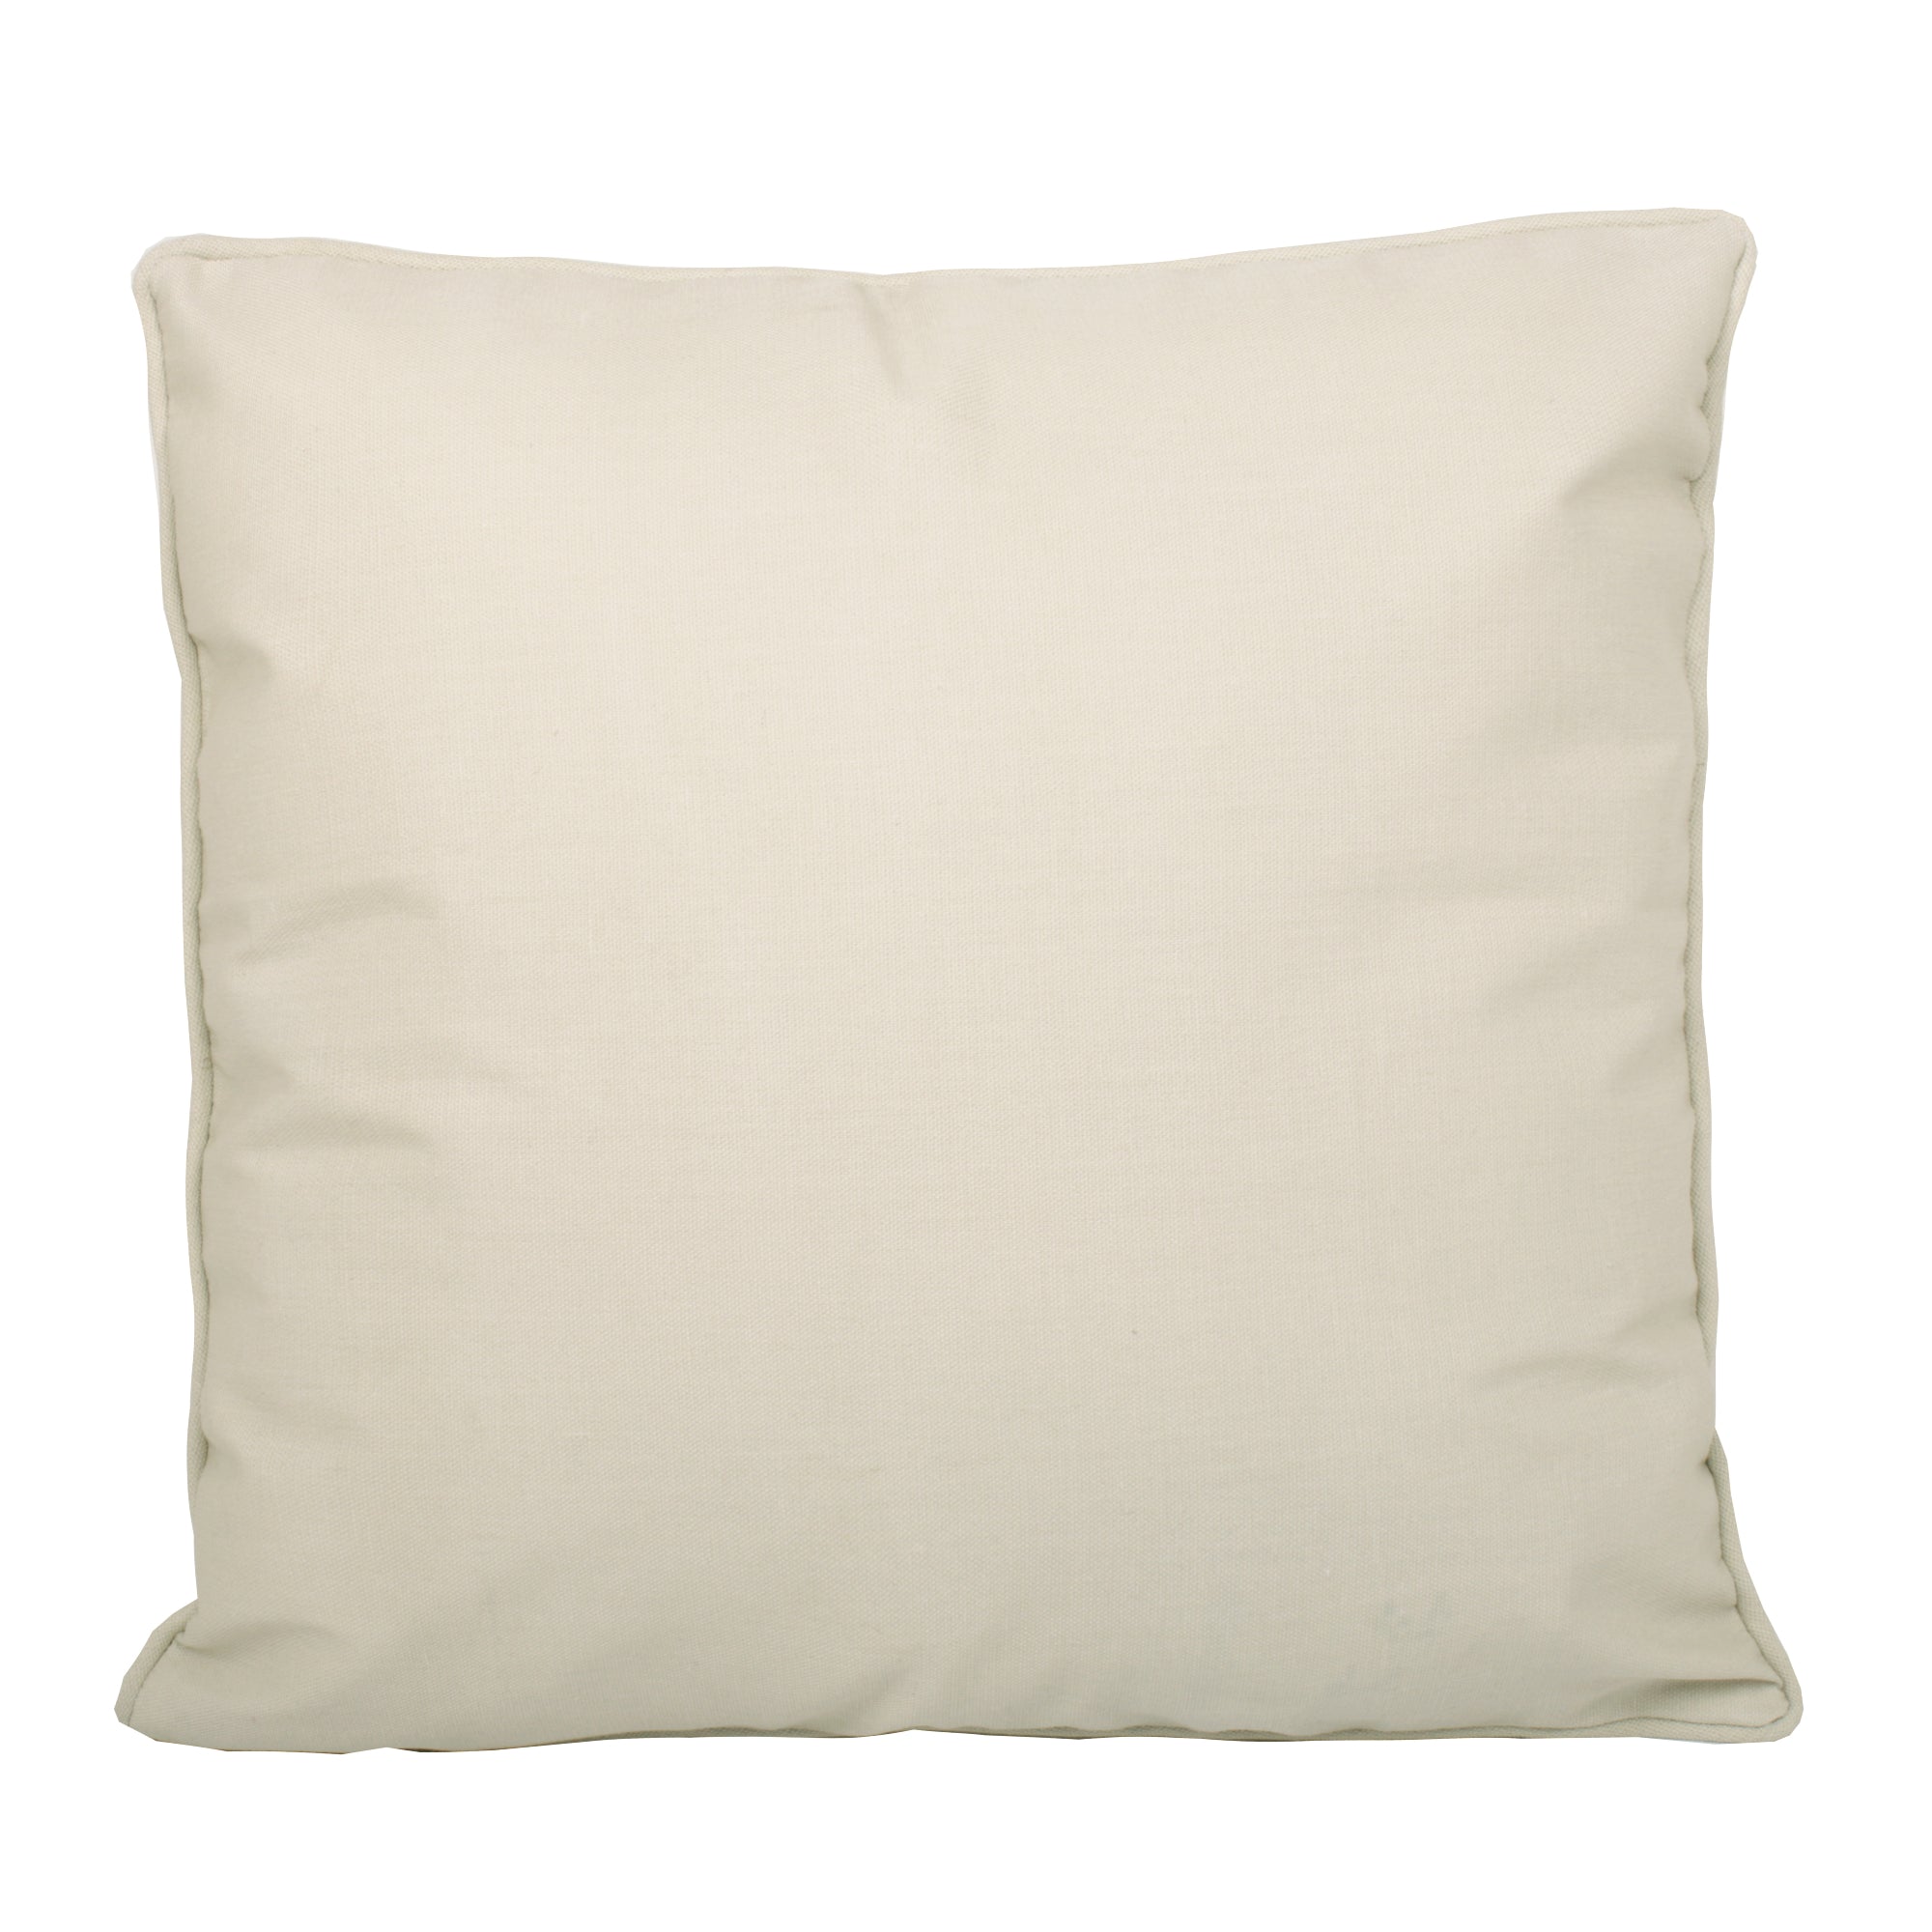 Filled Outdoor Cushion Plain Dye by Fusion in Natural